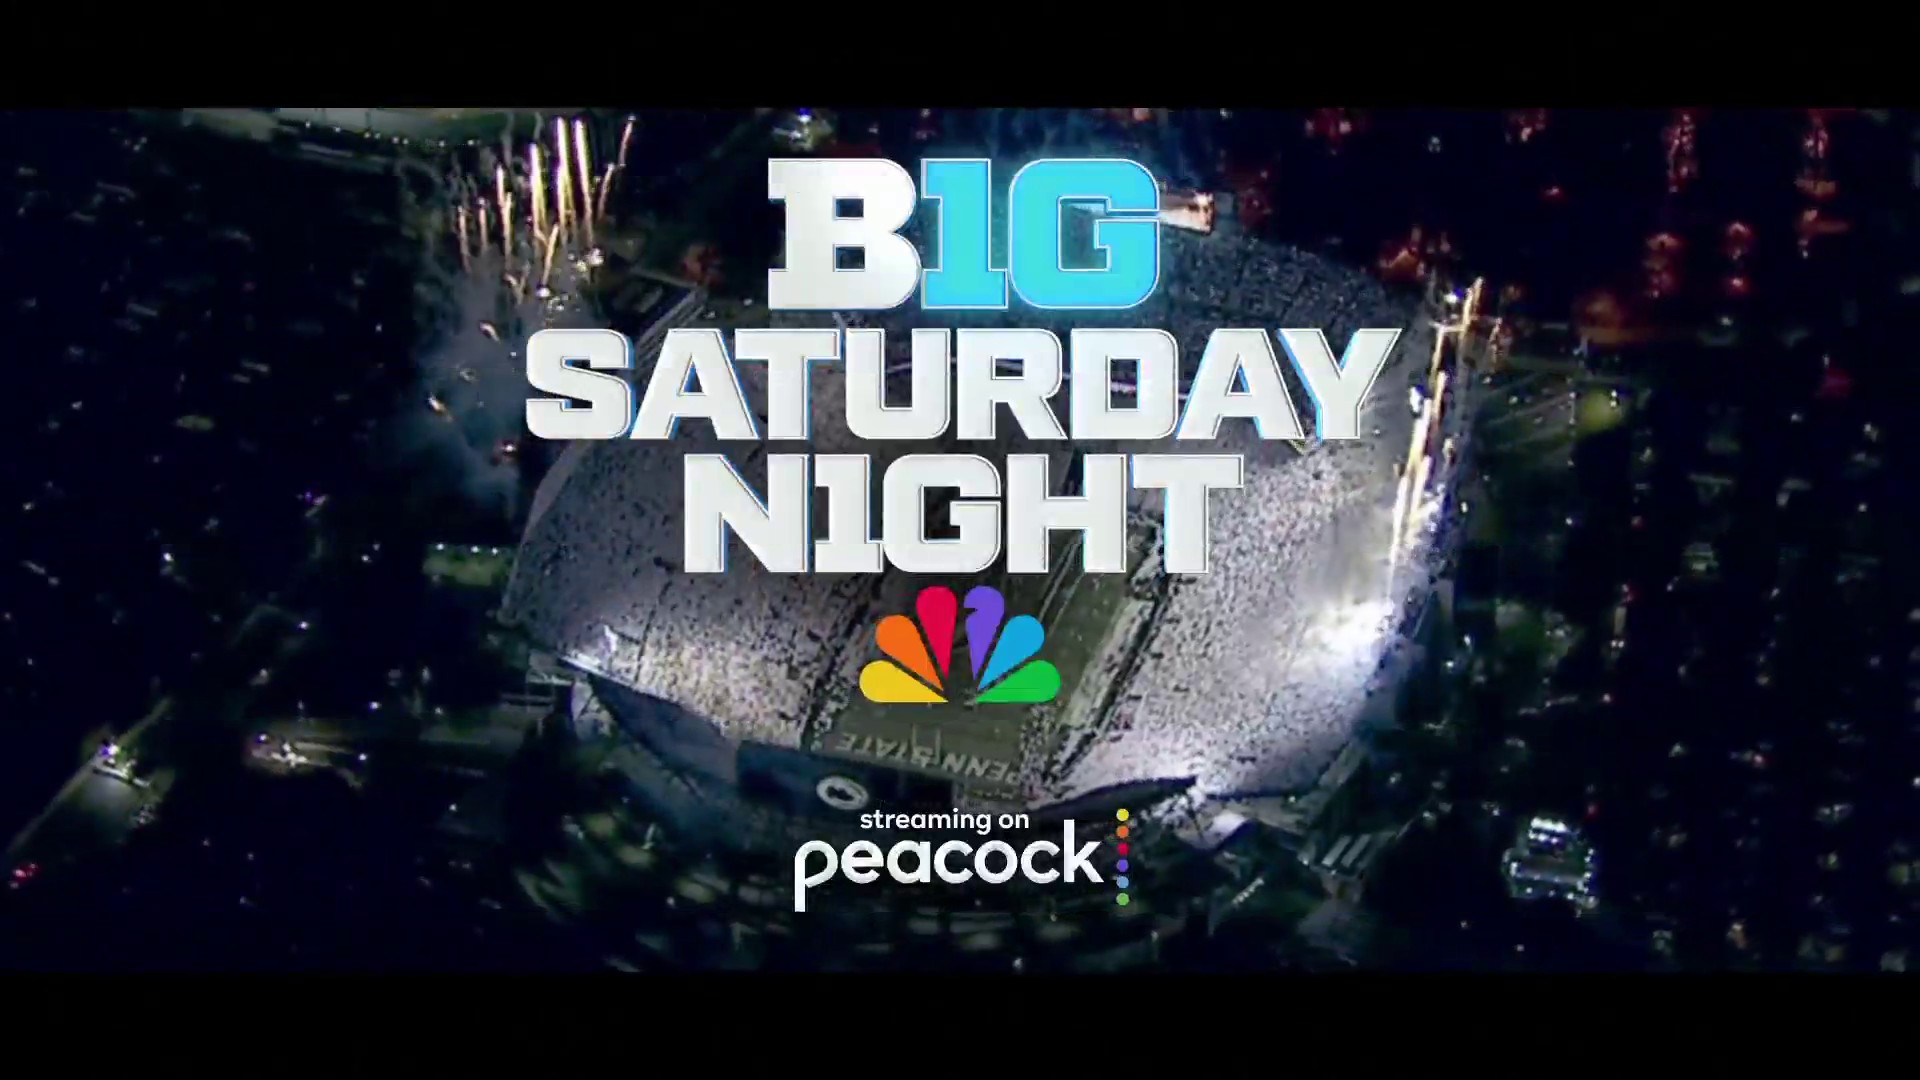 NBC adds NFL show to stream on Peacock after 'Sunday Night Football'